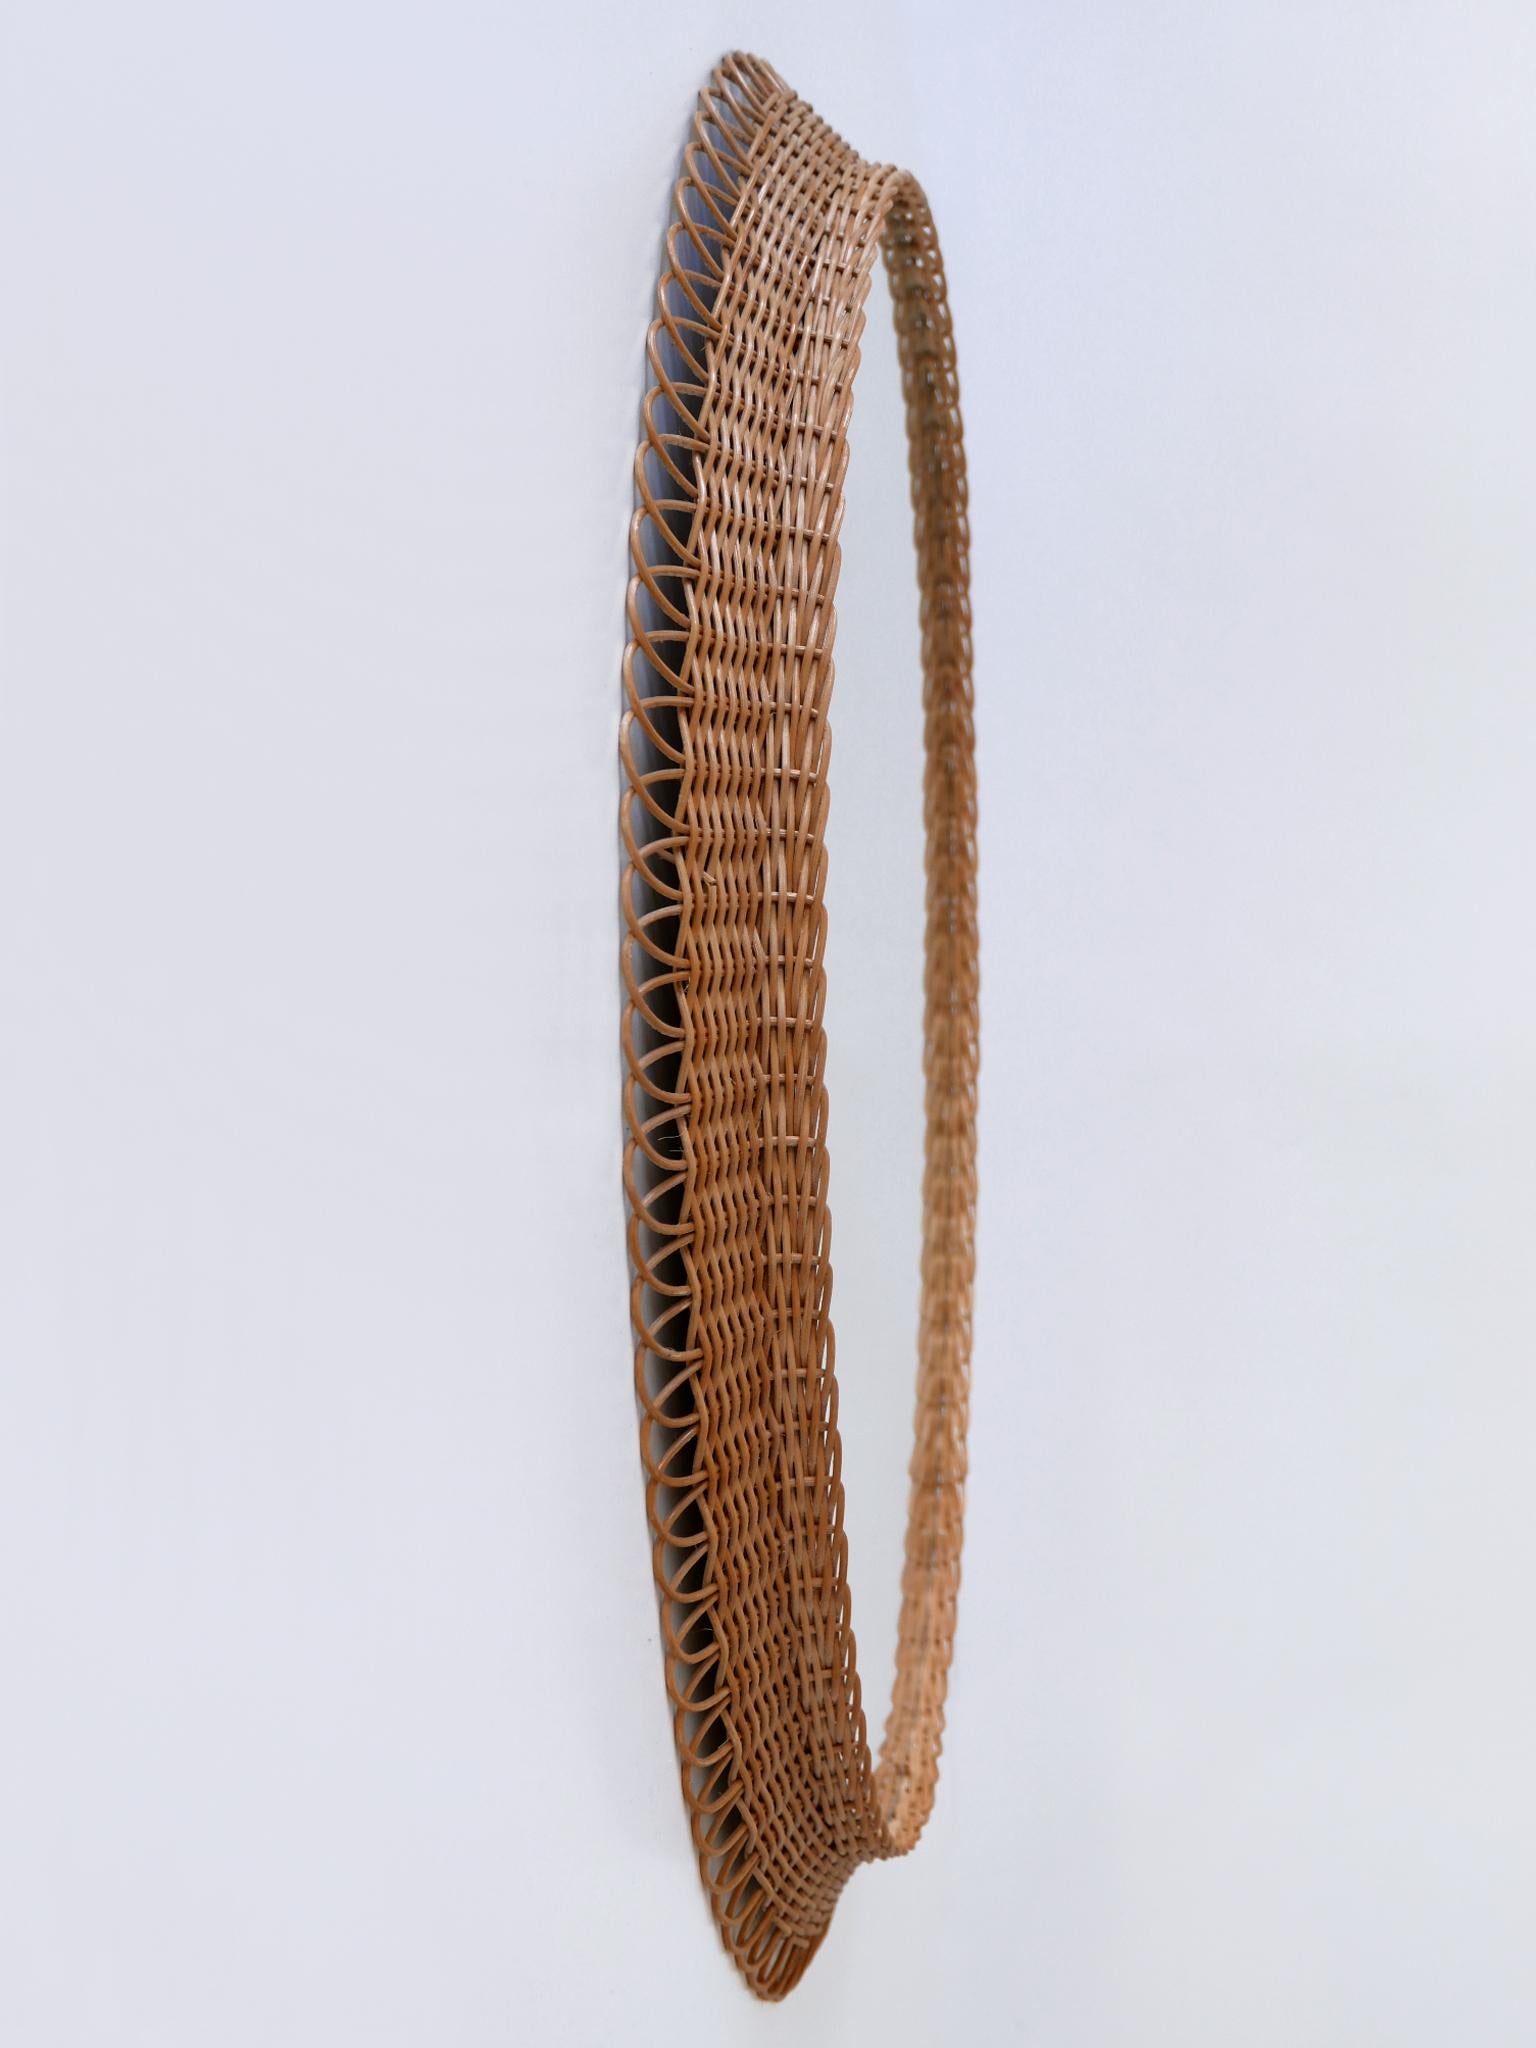 Decorative Mid-Century Modern Rattan Oval Wall Mirror Germany, 1960s For Sale 3